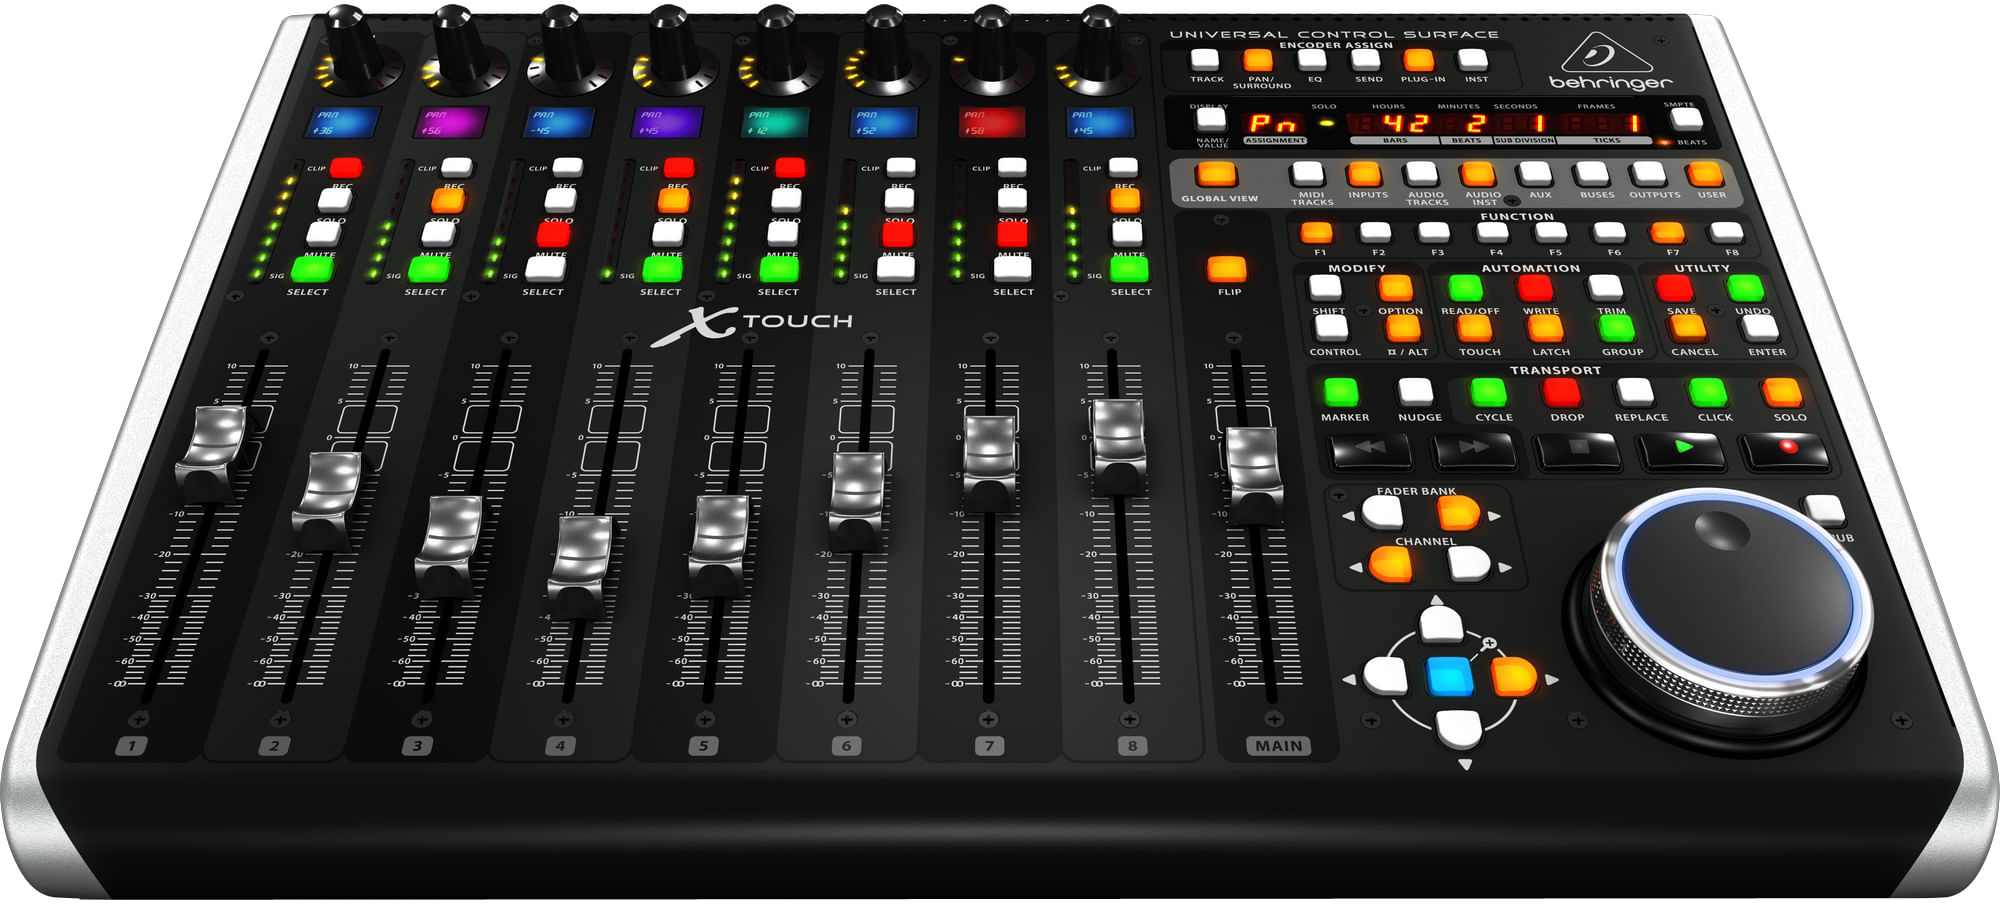 Surface　Cosmo　Behringer　X-Touch　Control　Universal　Music